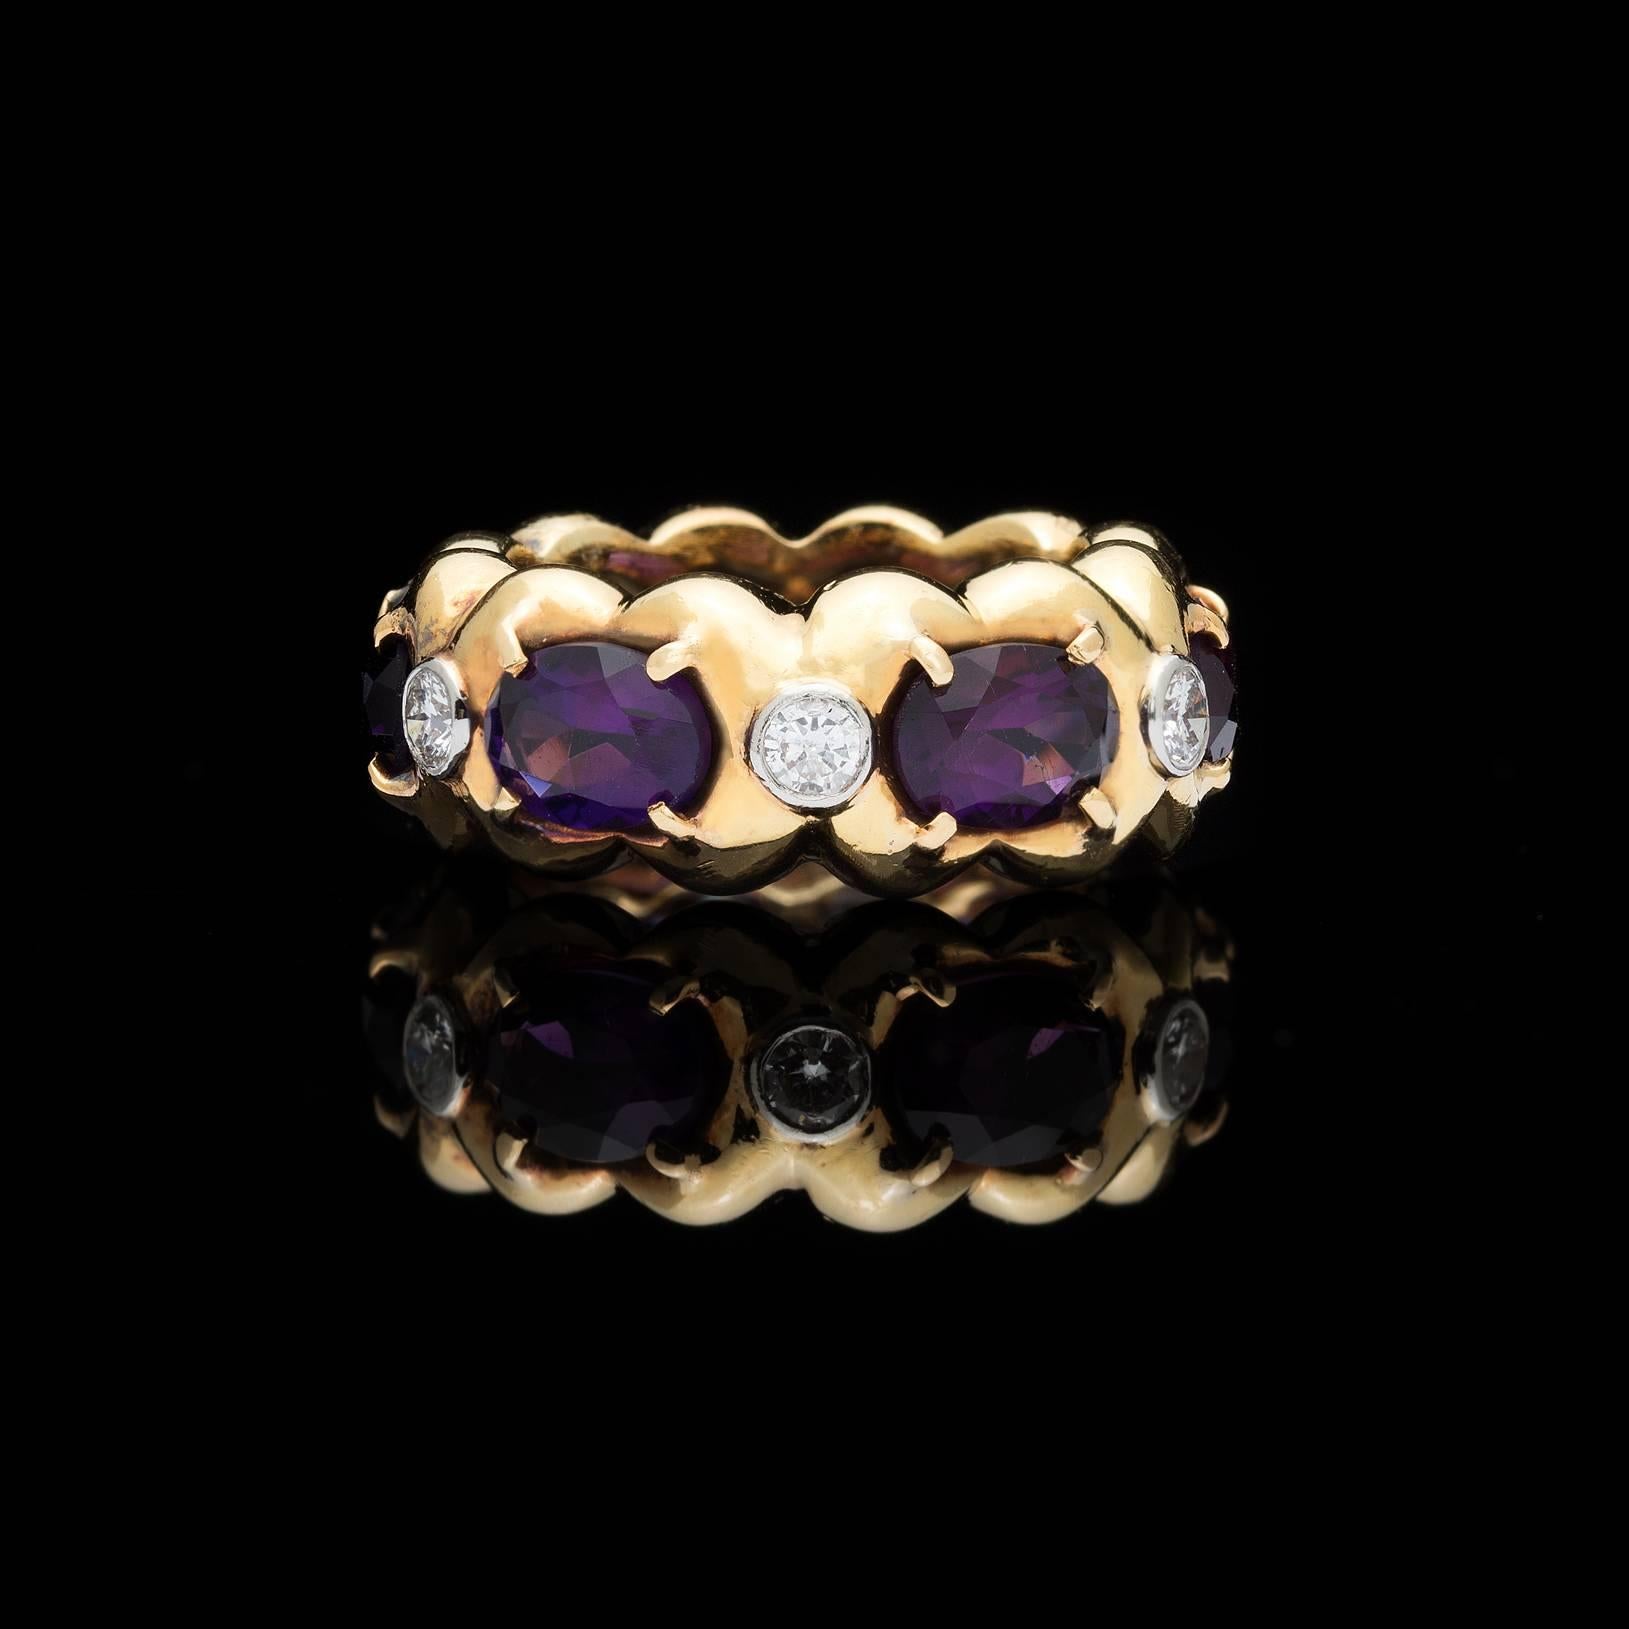 Verdura 18k gold band ring, with 6 horizontally-set oval-shaped deep purple ameythsts alternating with 6 platinum bezel-set round brilliant-cut diamonds, weighing an estimated total of 0.45ct. The ring weighs 14.9 grams, and fits a finger size of 5